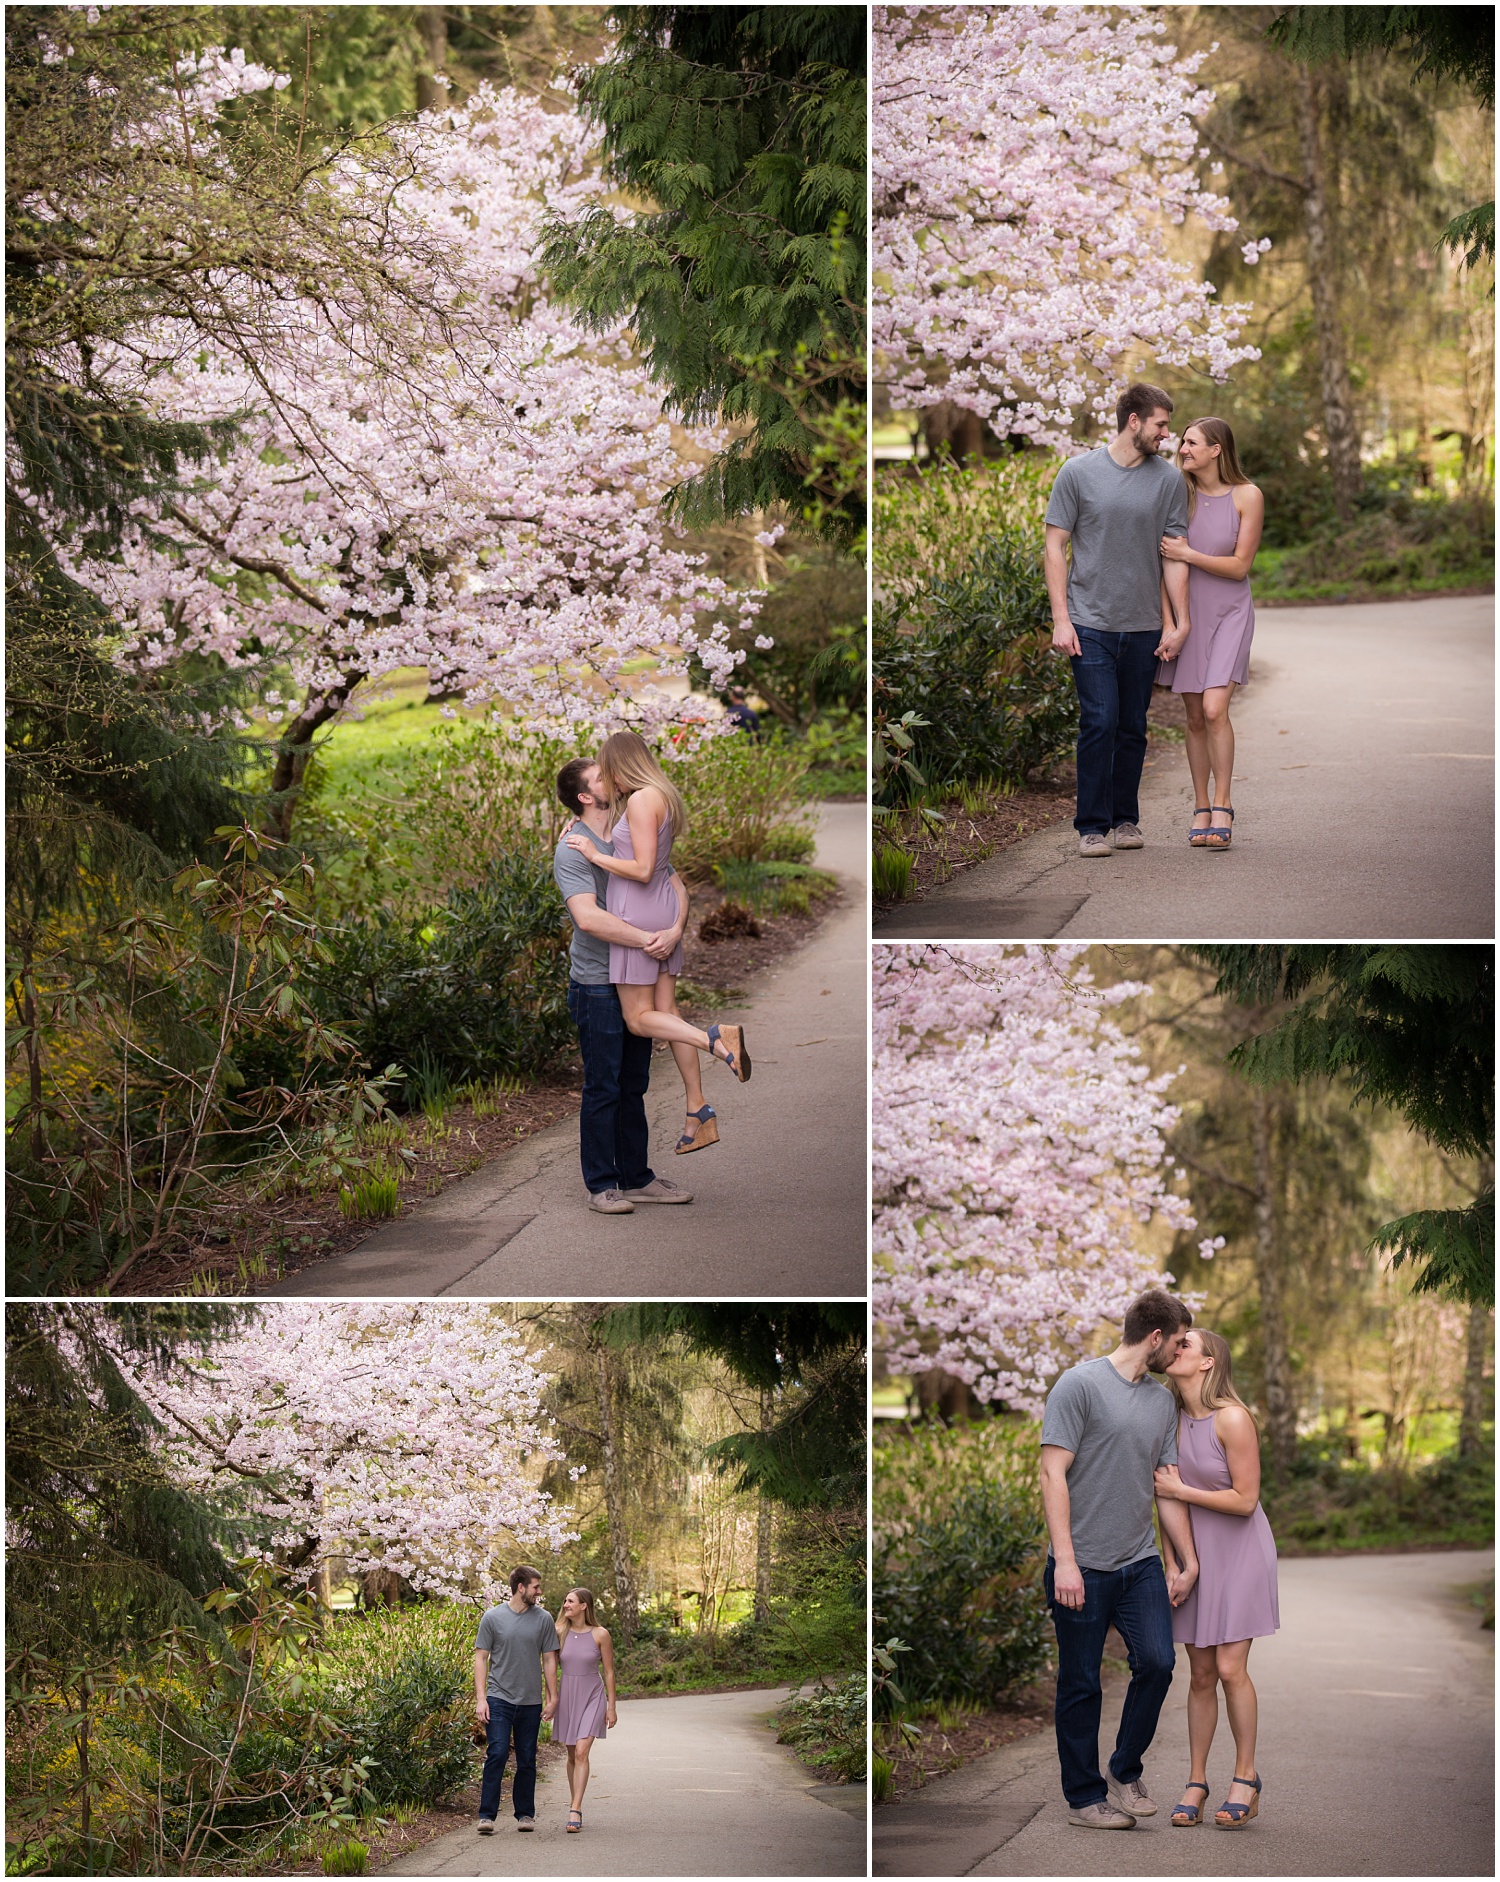 Amazing Day Photography - Cherry Blossom Engagement Session - Queen Elizabeth Park Engagement Session - Vancouver Engagement Photographer  (7).jpg